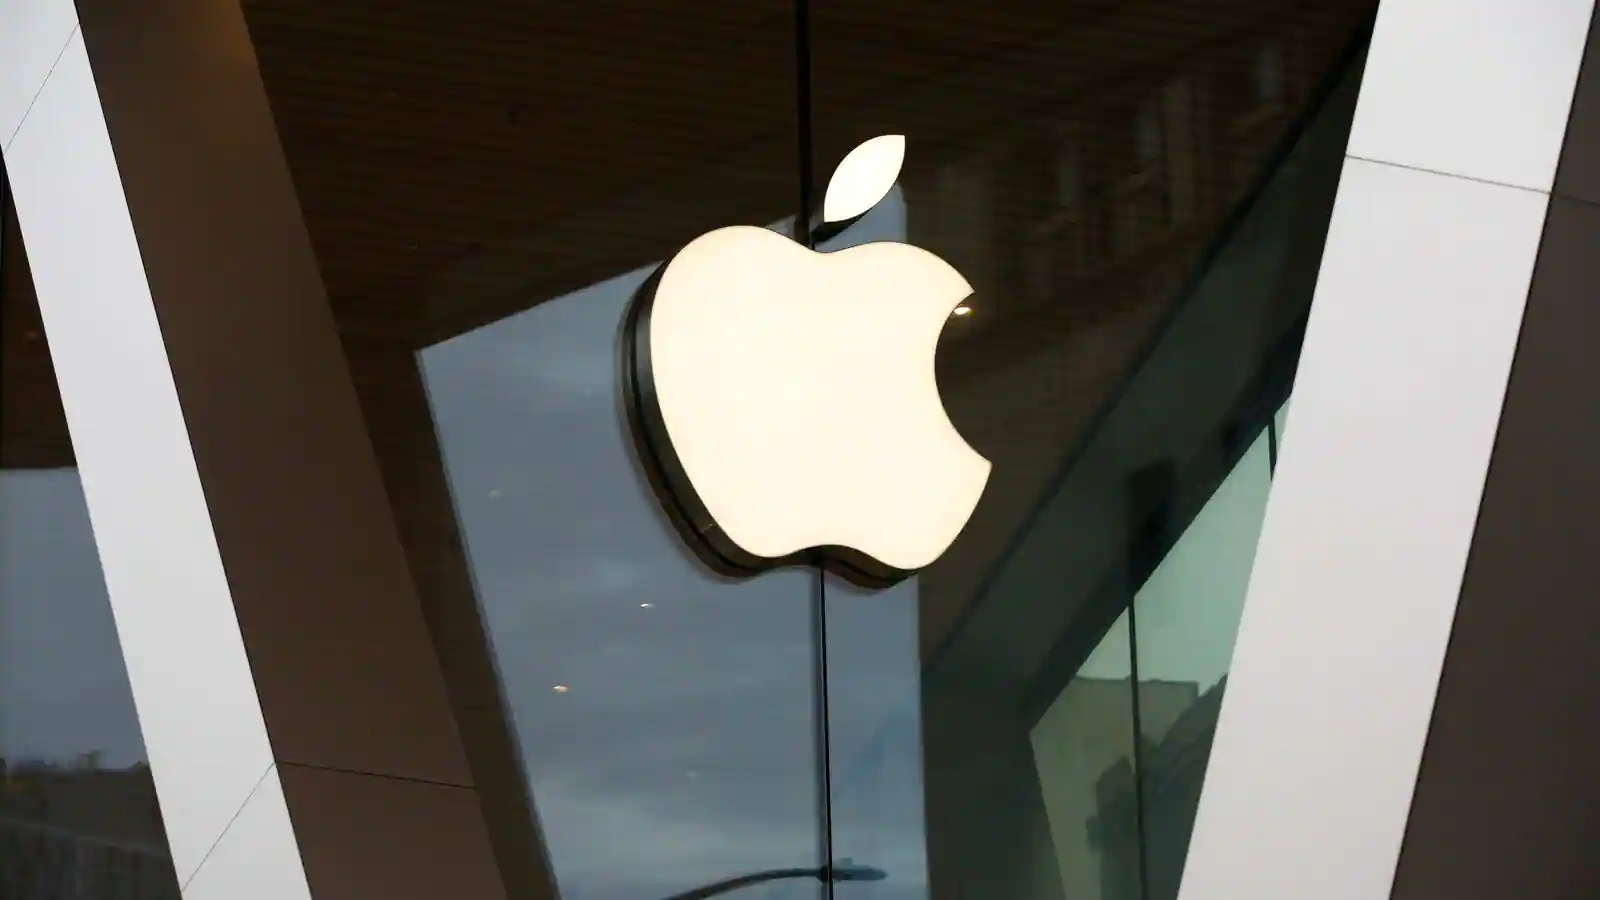 Cook says store network grows, Apple income pops 11% to $123.9 billion